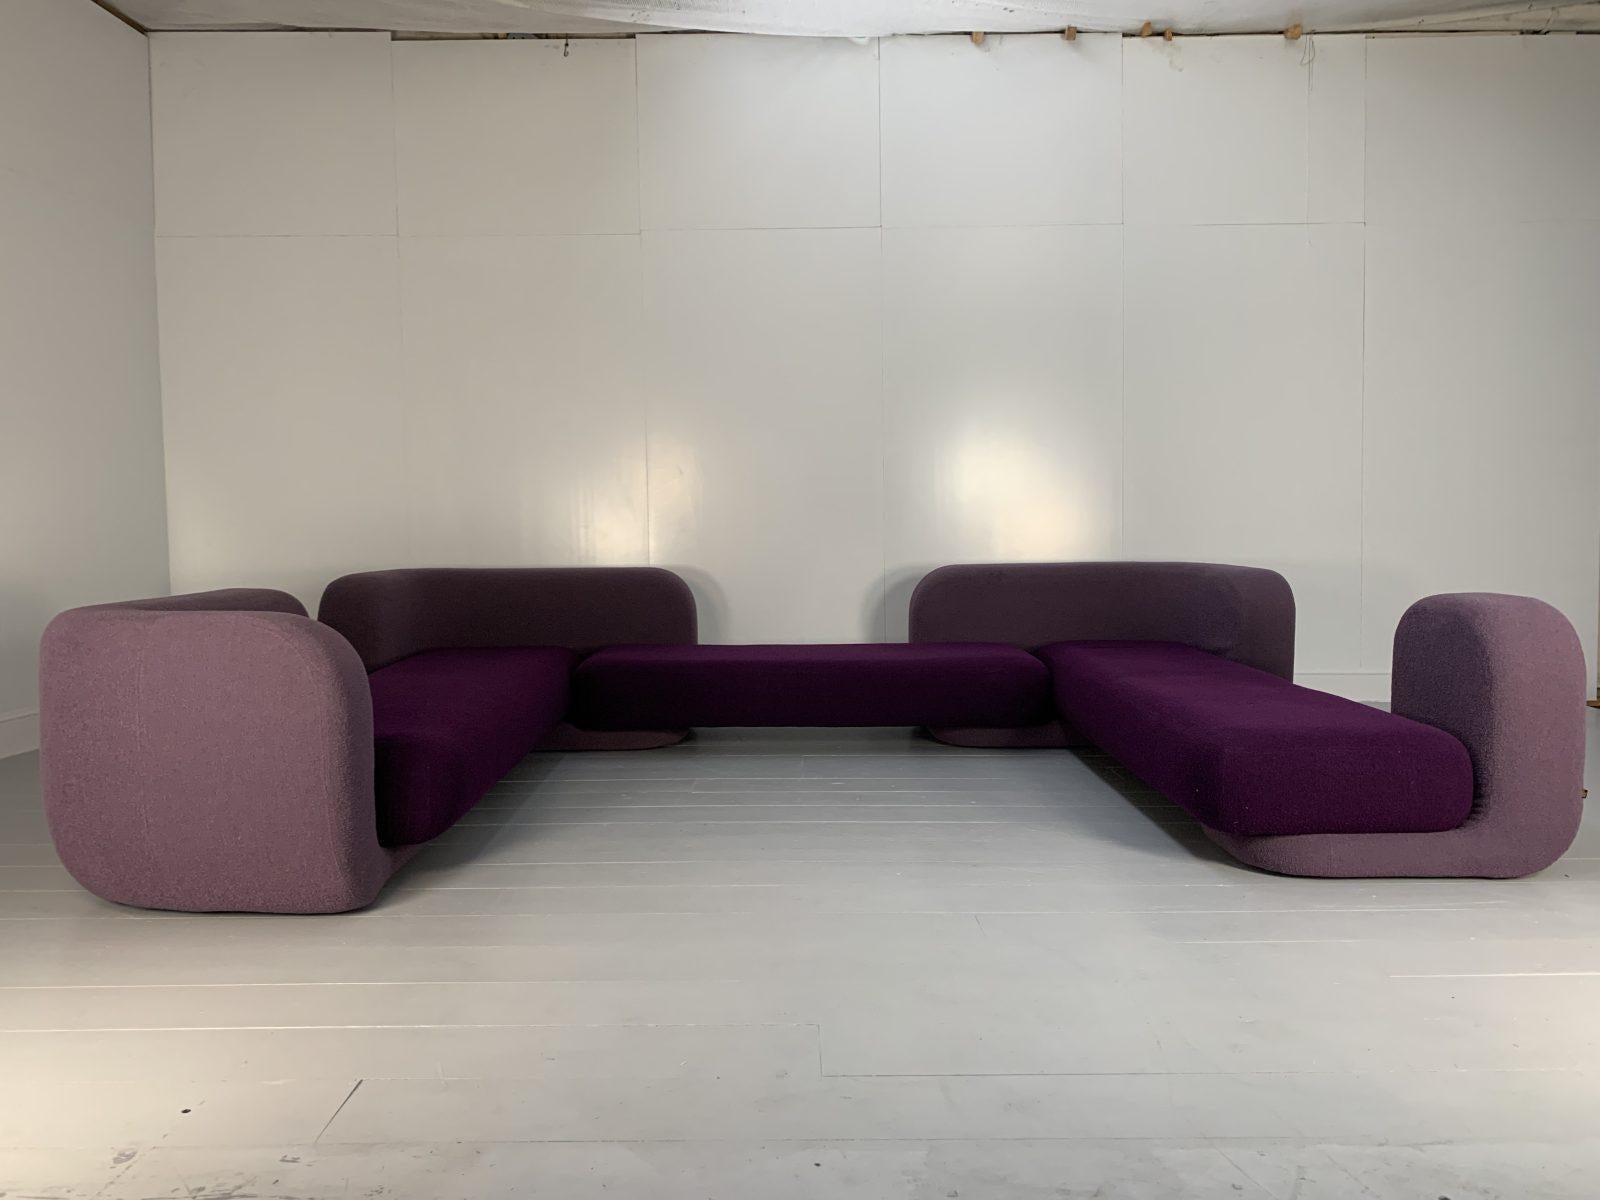 Contemporary Tom Dixon “Soft” Sofa, 10-Seat Sofa, Made by George Smith, in Bouclé Wool